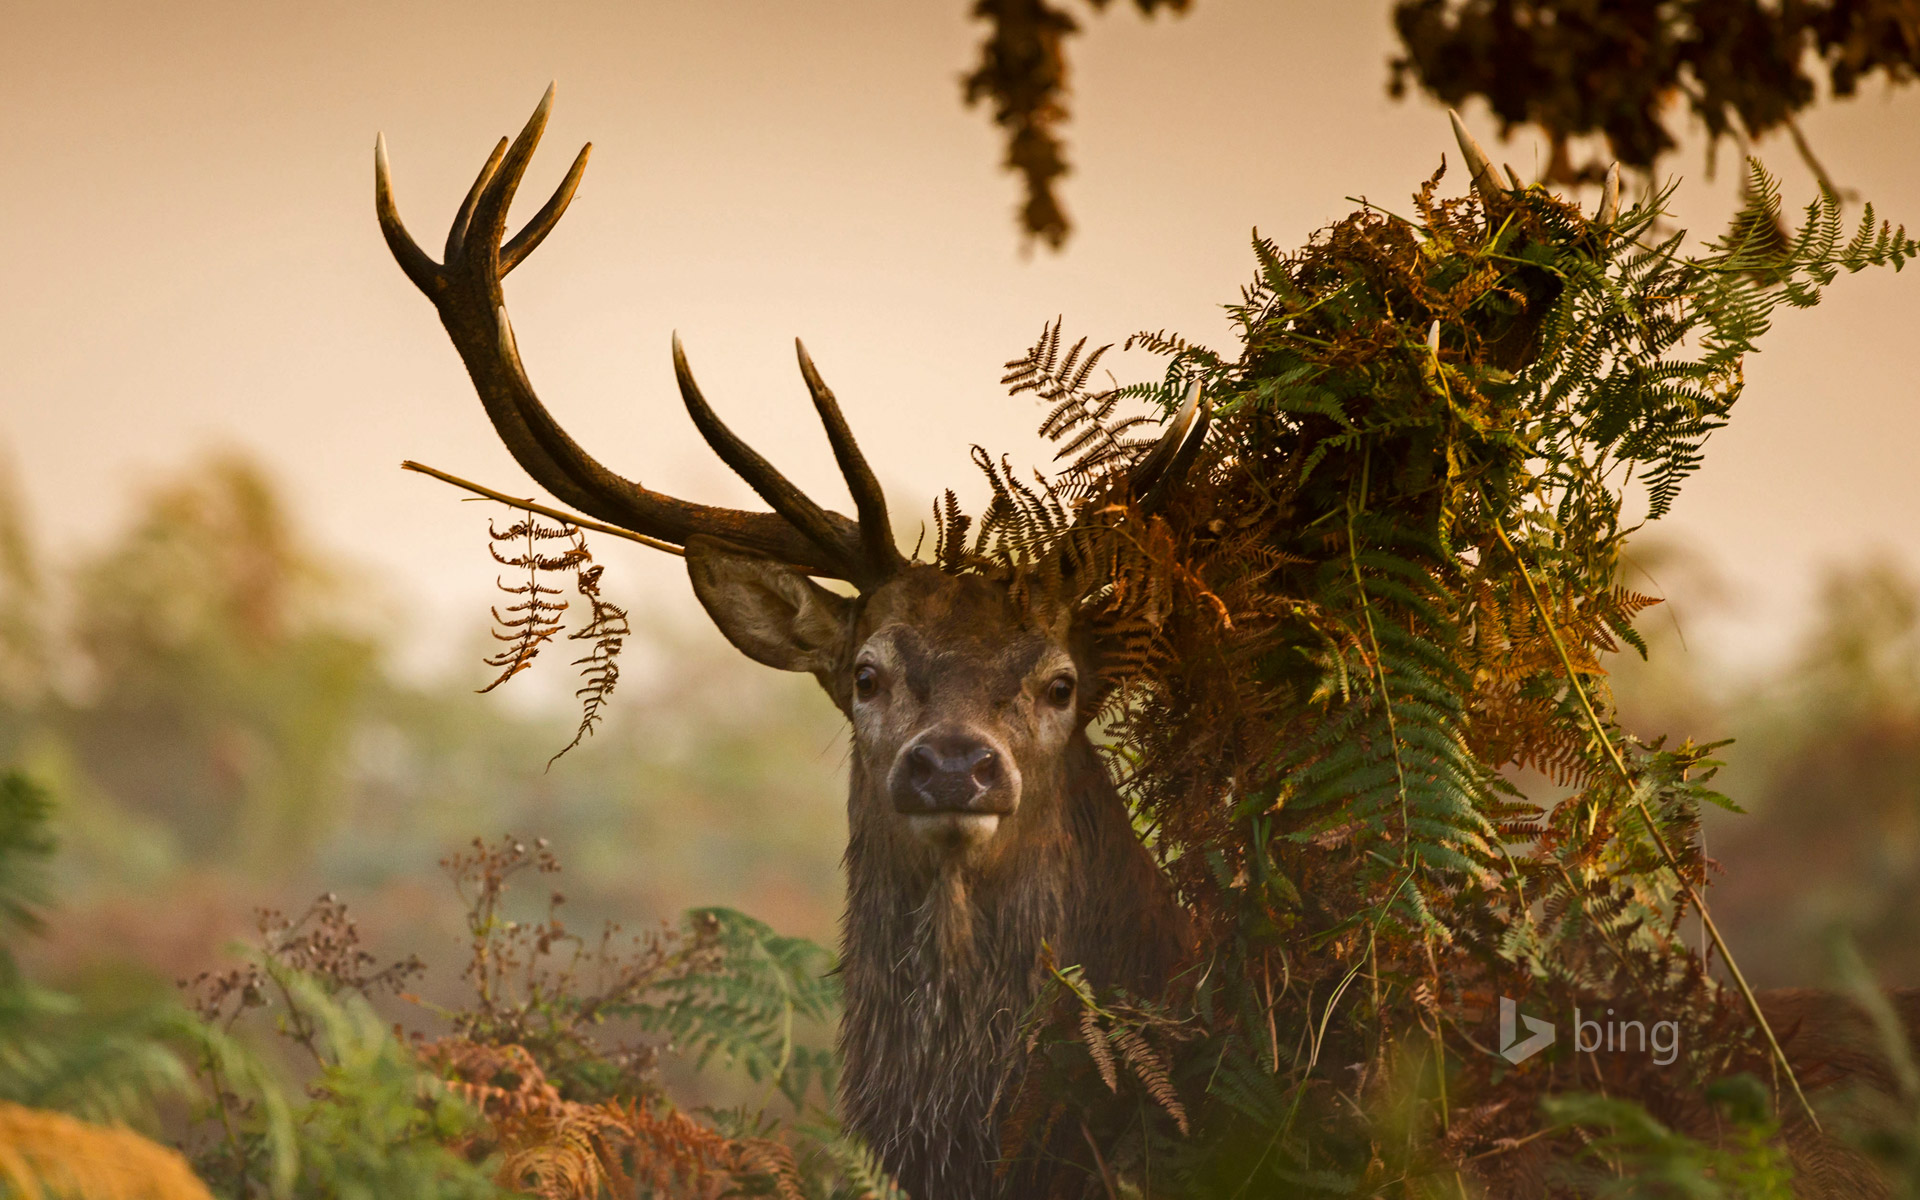 A male red deer in London’s Richmond Park